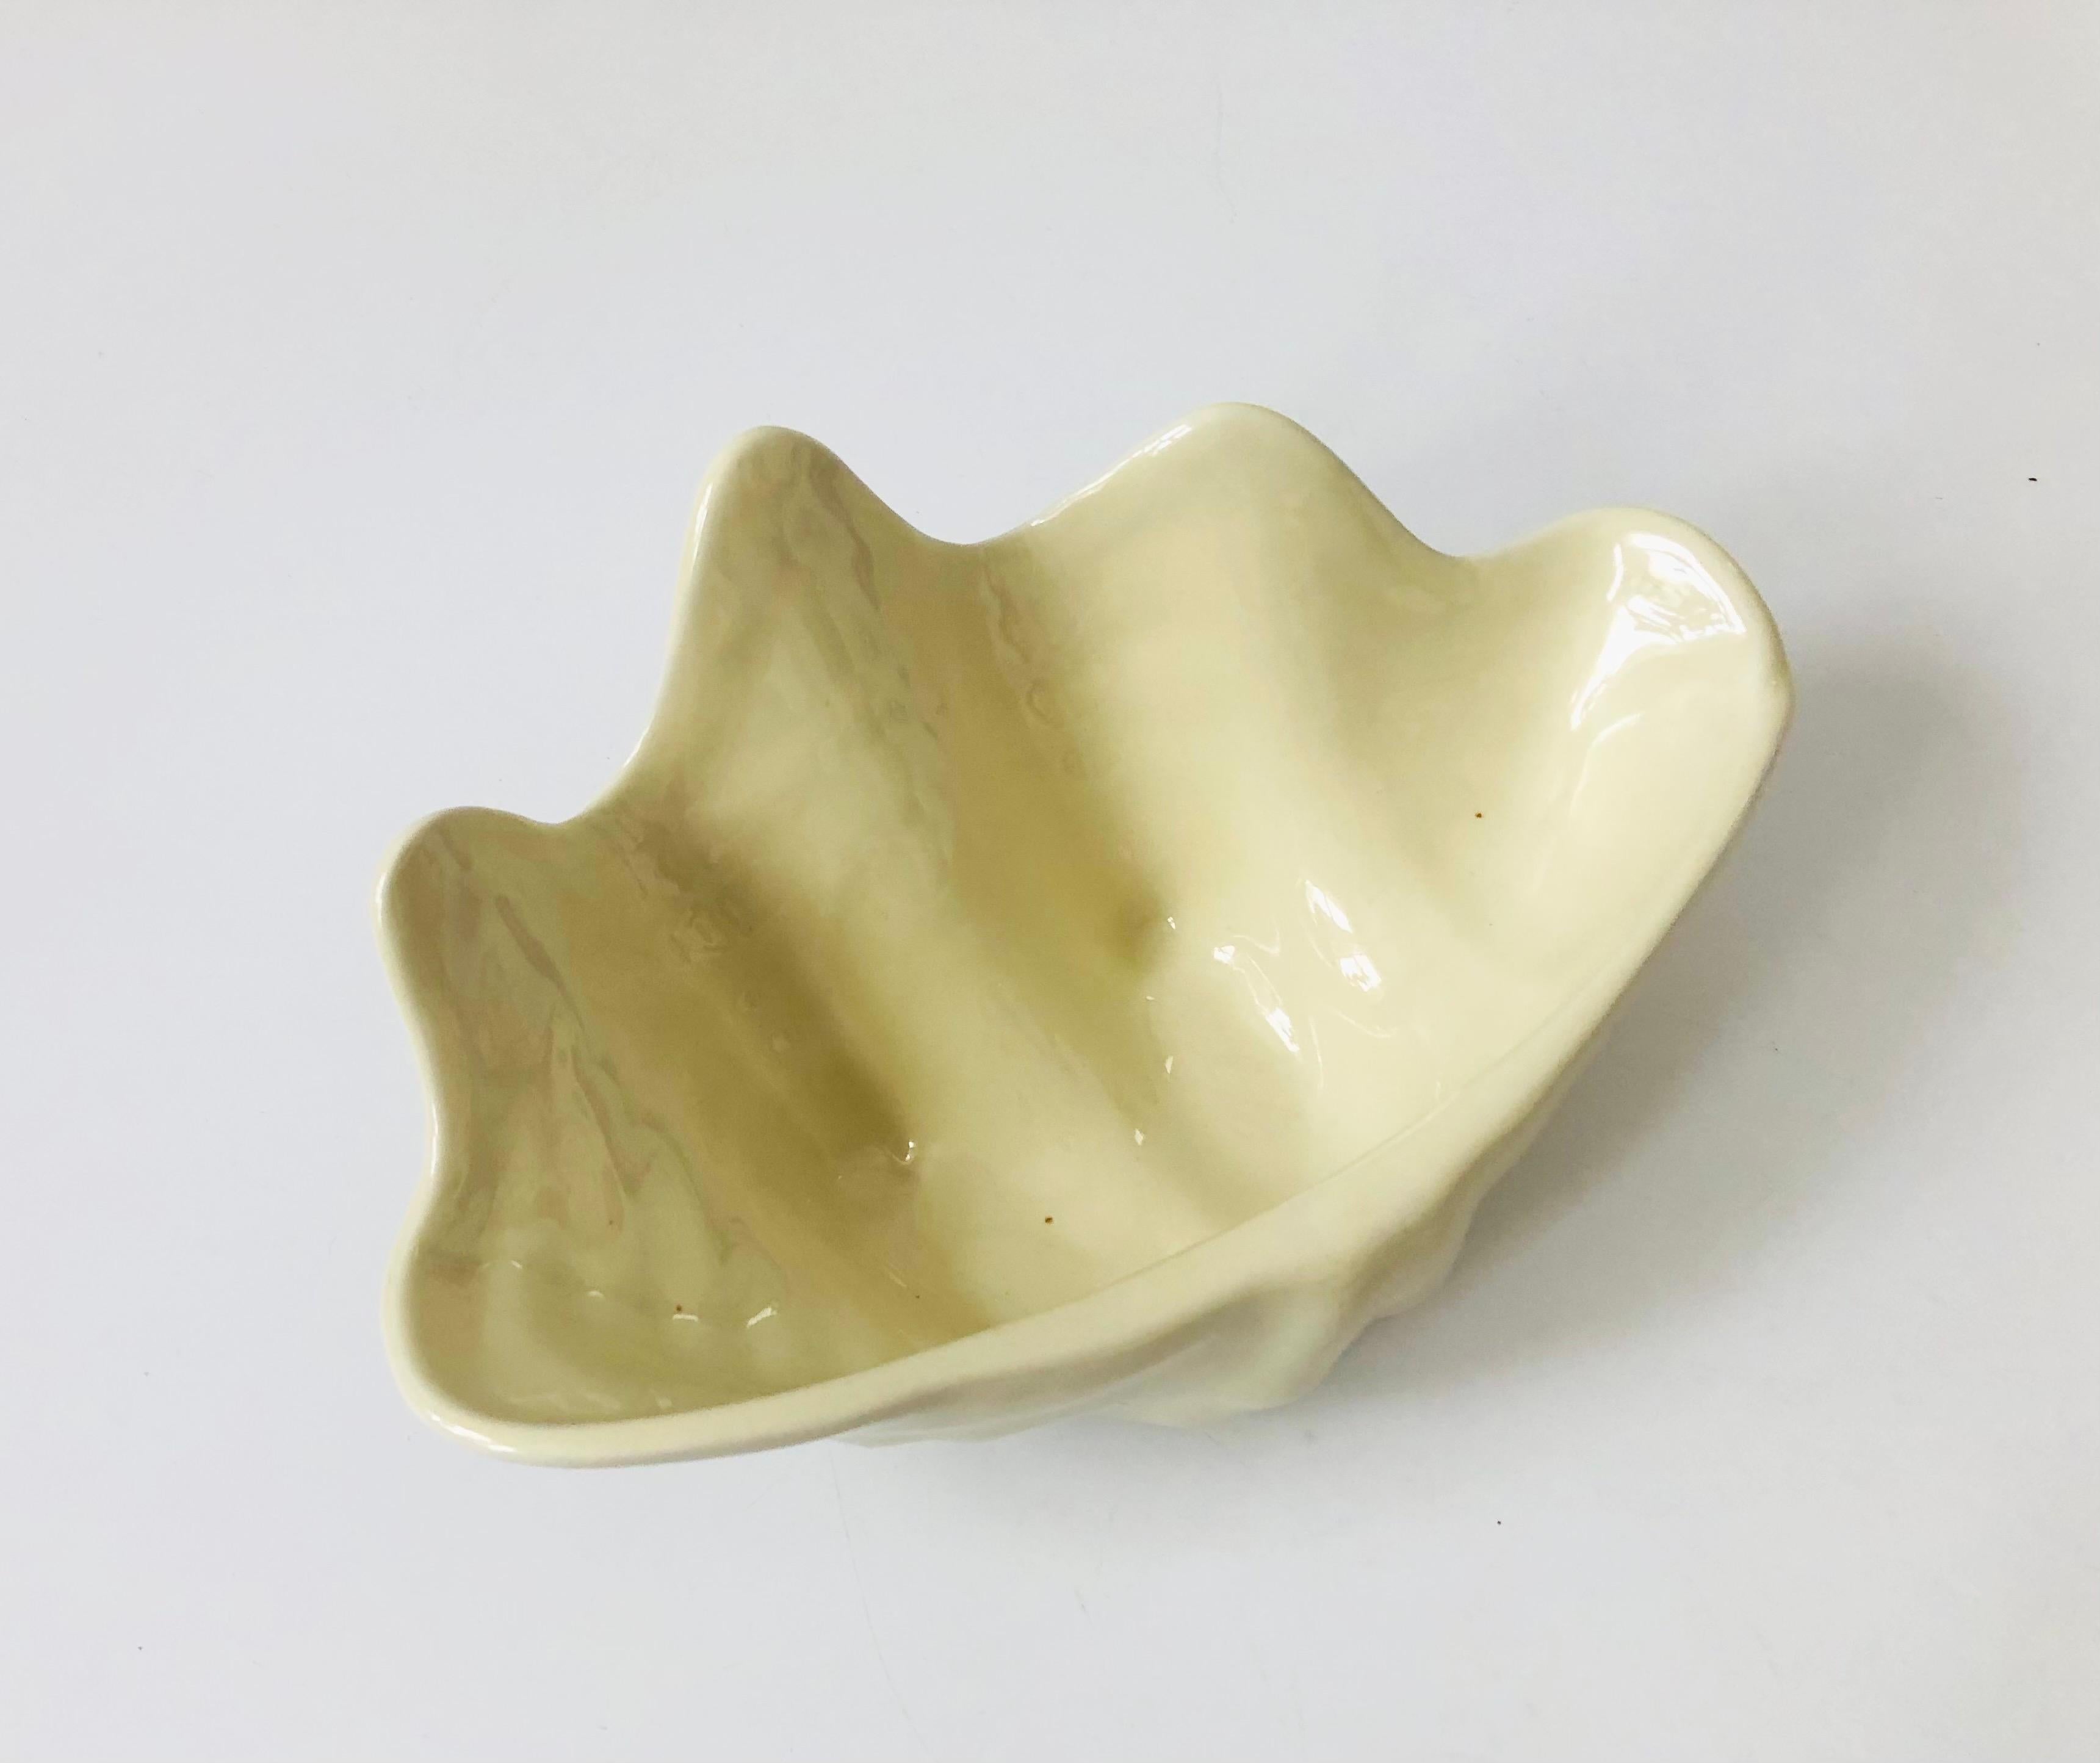 North American Large White Ceramic Clam Shell Bowl by Hall China